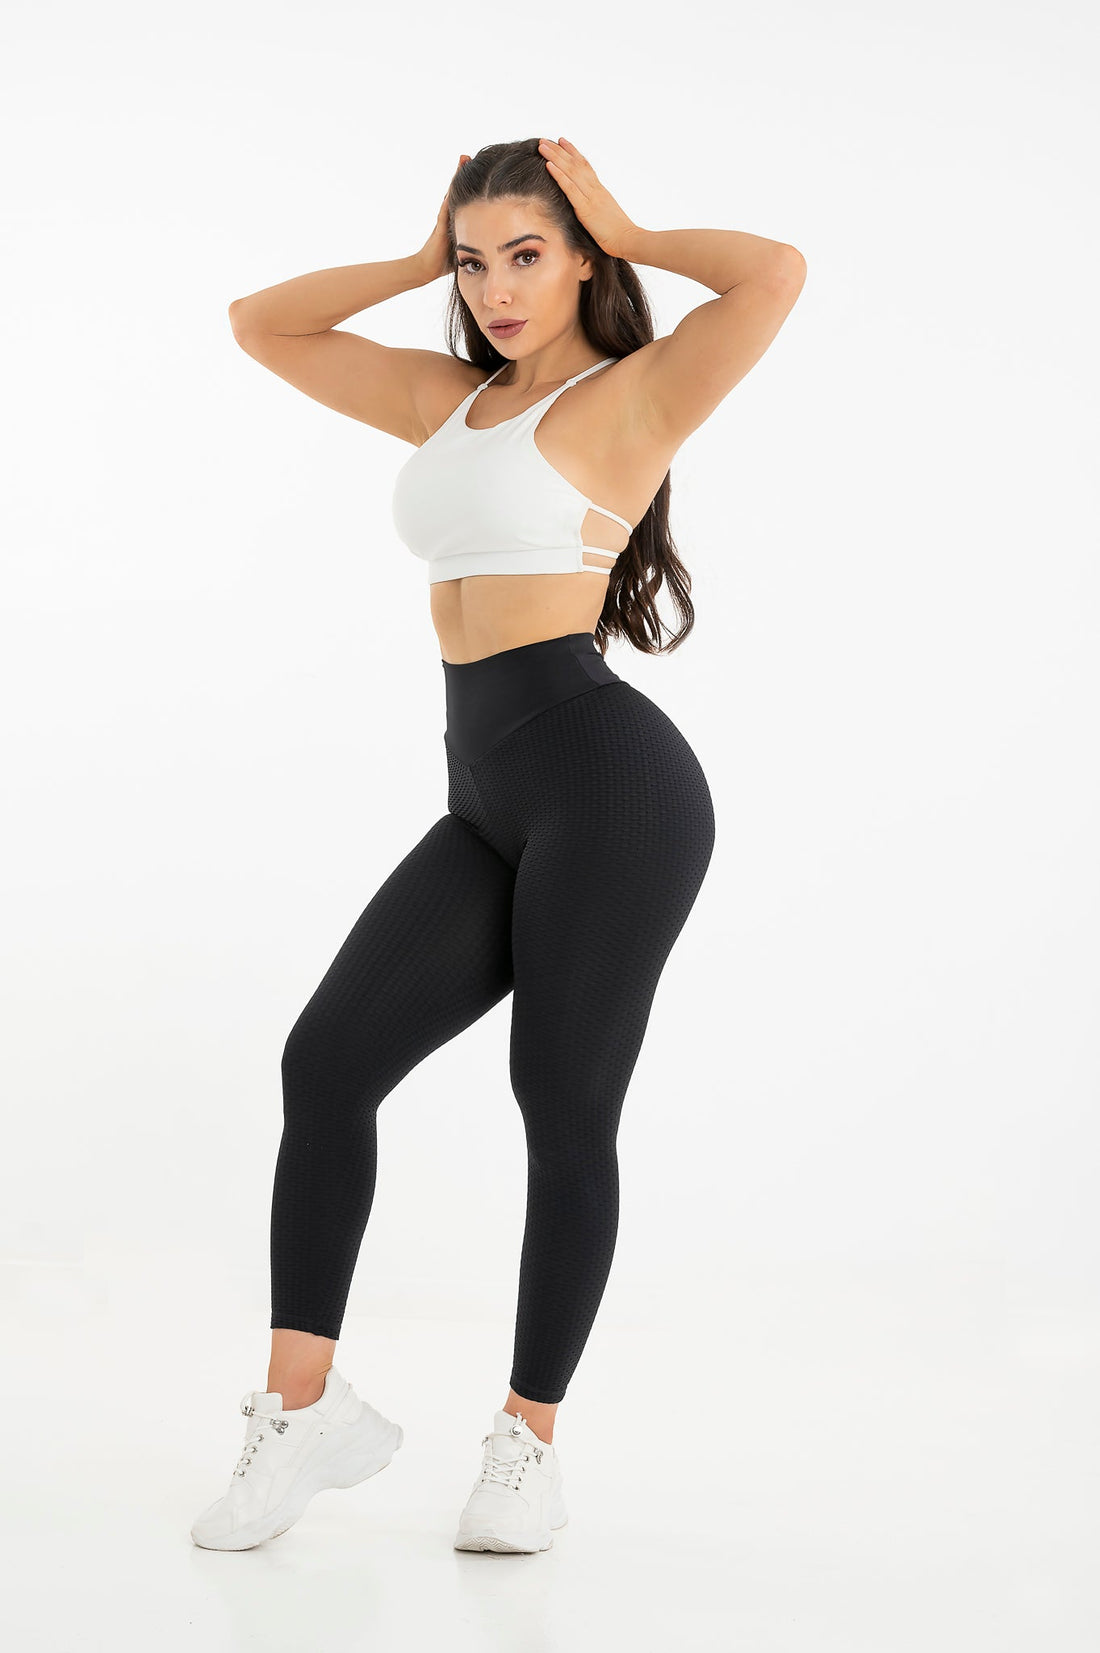 Asos Curve Curve Skin Firming Support 120 Denier Tights, $16